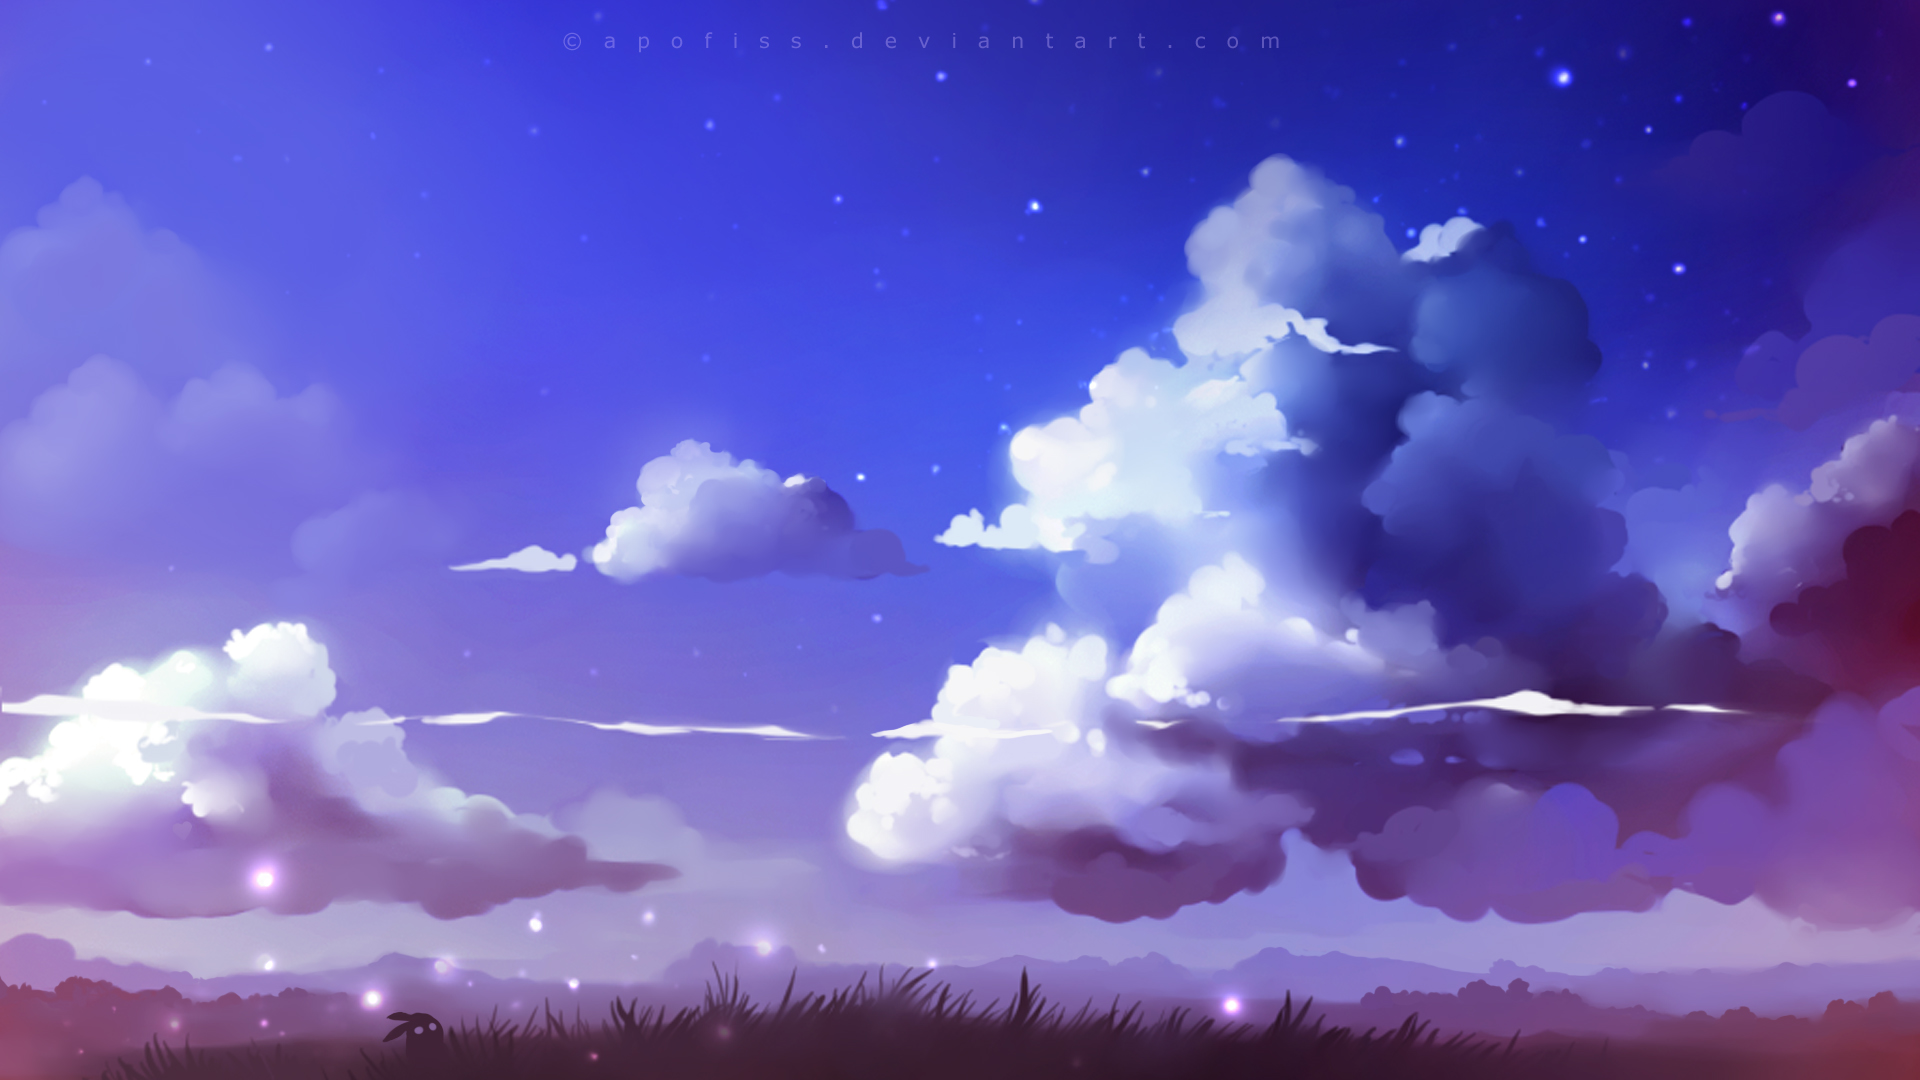 Cloudscape by Apofiss